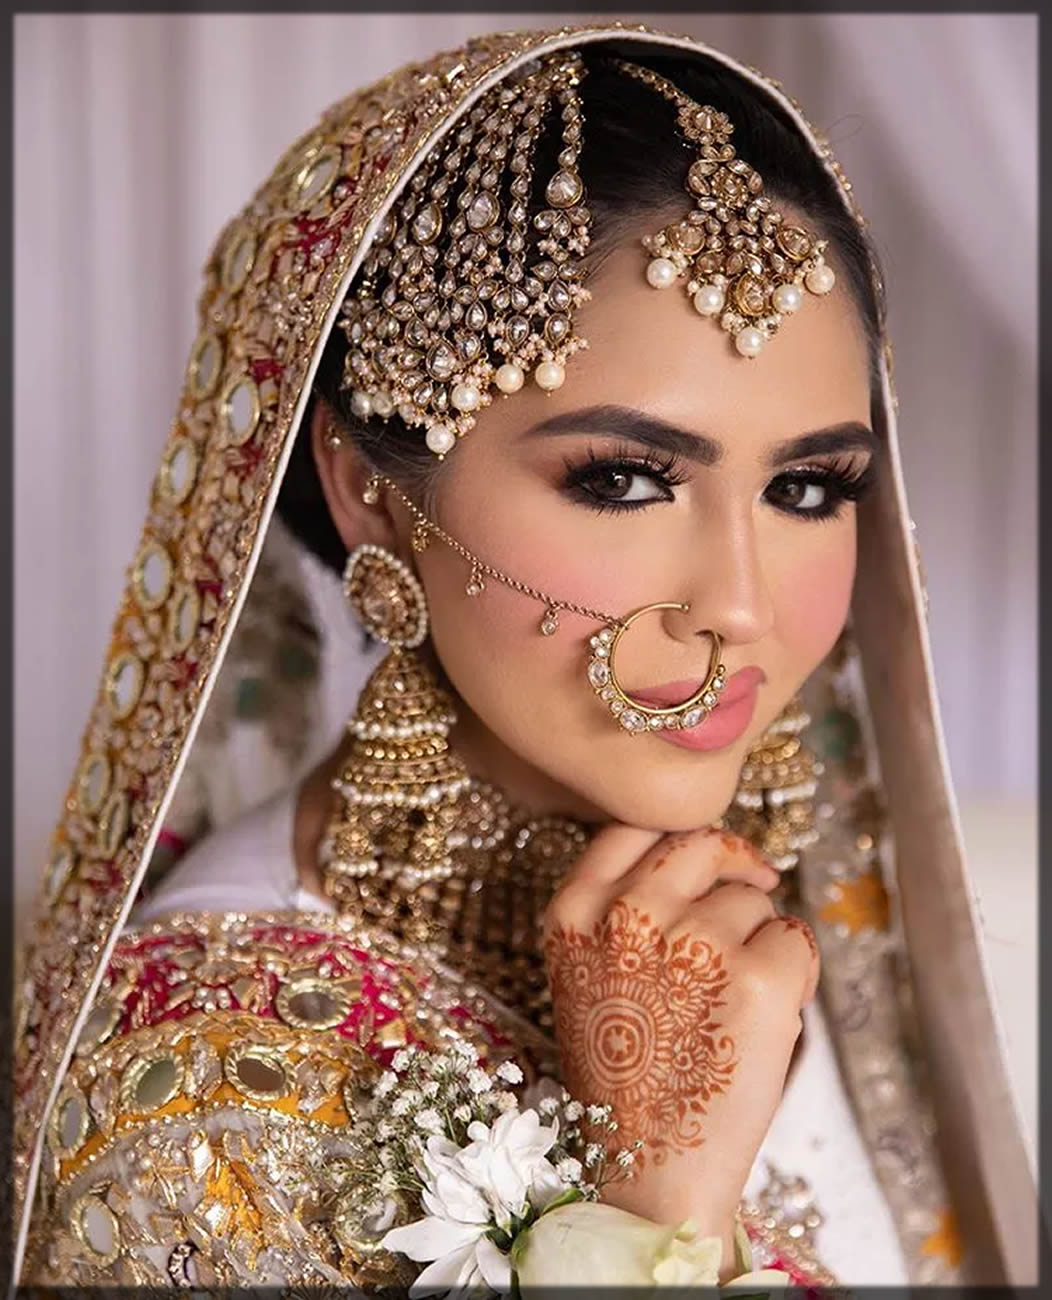 Buy Chinar Jewels Nathiya Bridal Nose Rings/Nath in Silver and Golden Color  5.0 cm in Diameter For Non Pierced Nose, Press Type Clip, Gold Plated with  Traditional Kundan Stones, With Pearl Chain.